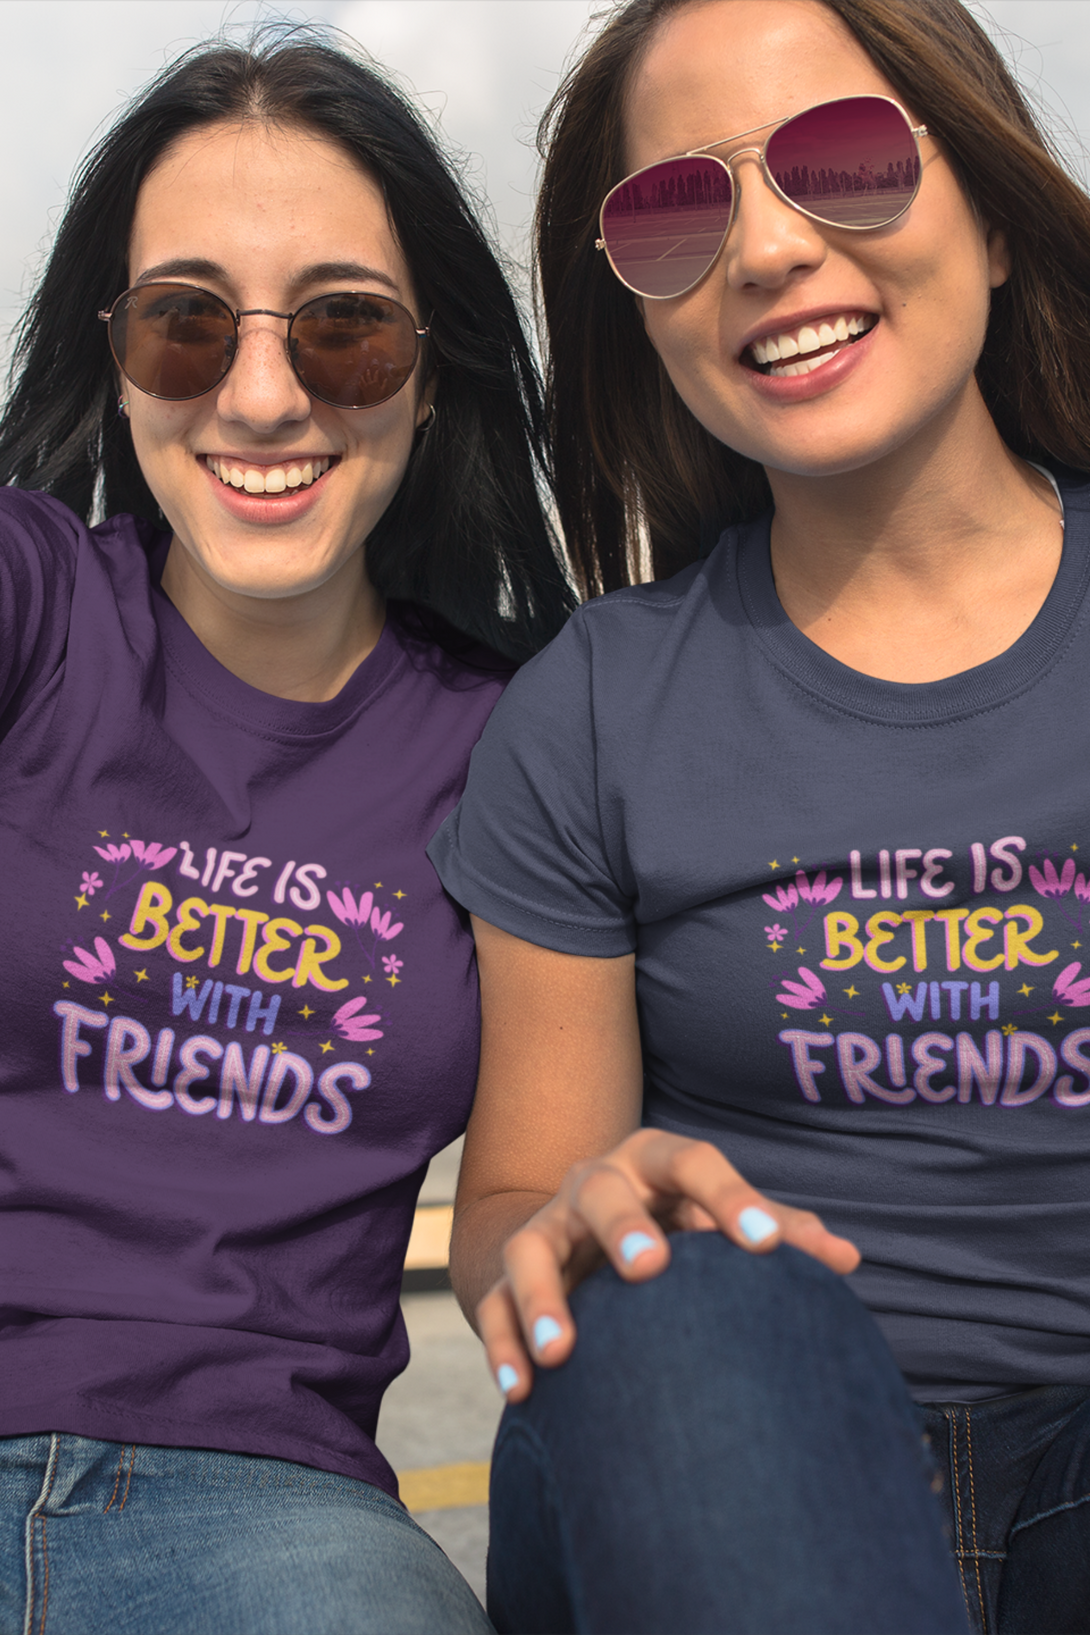 Life Is Better With Friends Printed T-Shirt For Women - WowWaves - 5